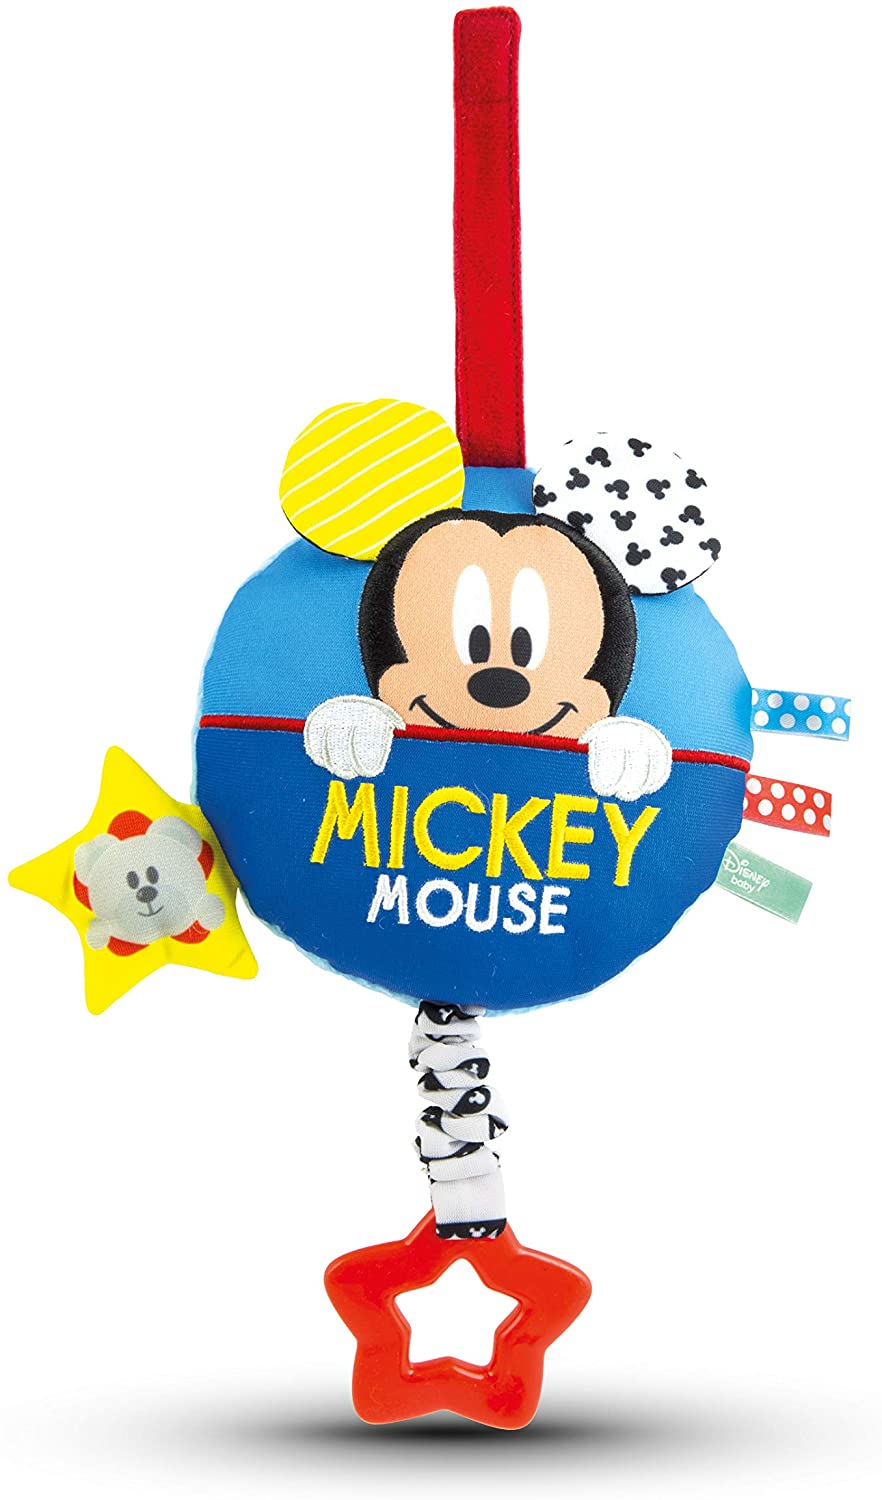 Baby Clementoni 17211 - Disney Baby Mickey Mouse Soft musical toy for babies, ages 0 months plus